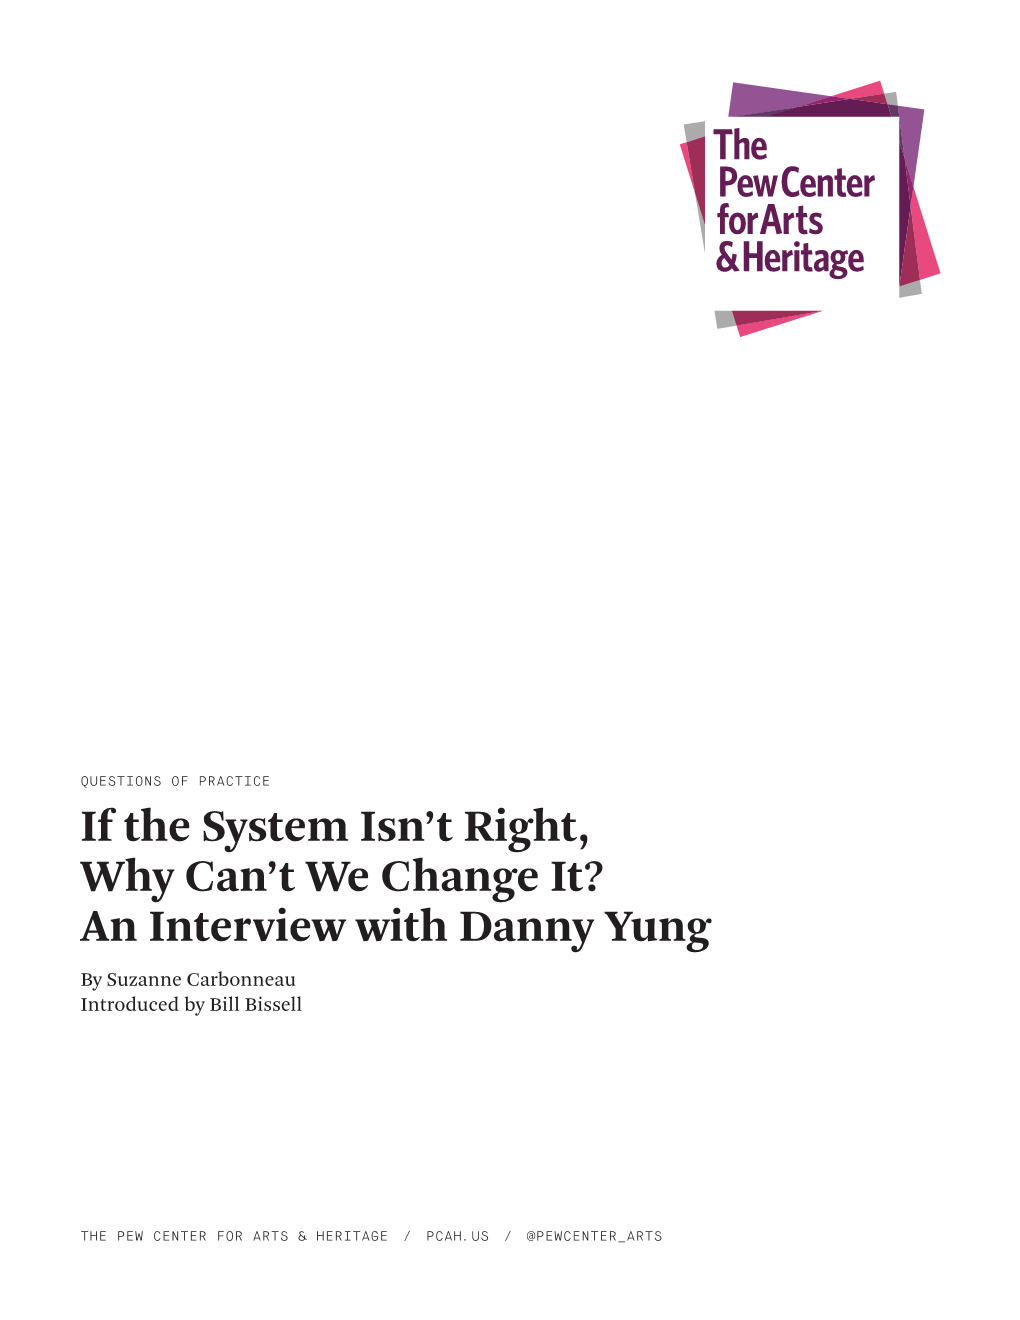 An Interview with Danny Yung by Suzanne Carbonneau Introduced by Bill Bissell